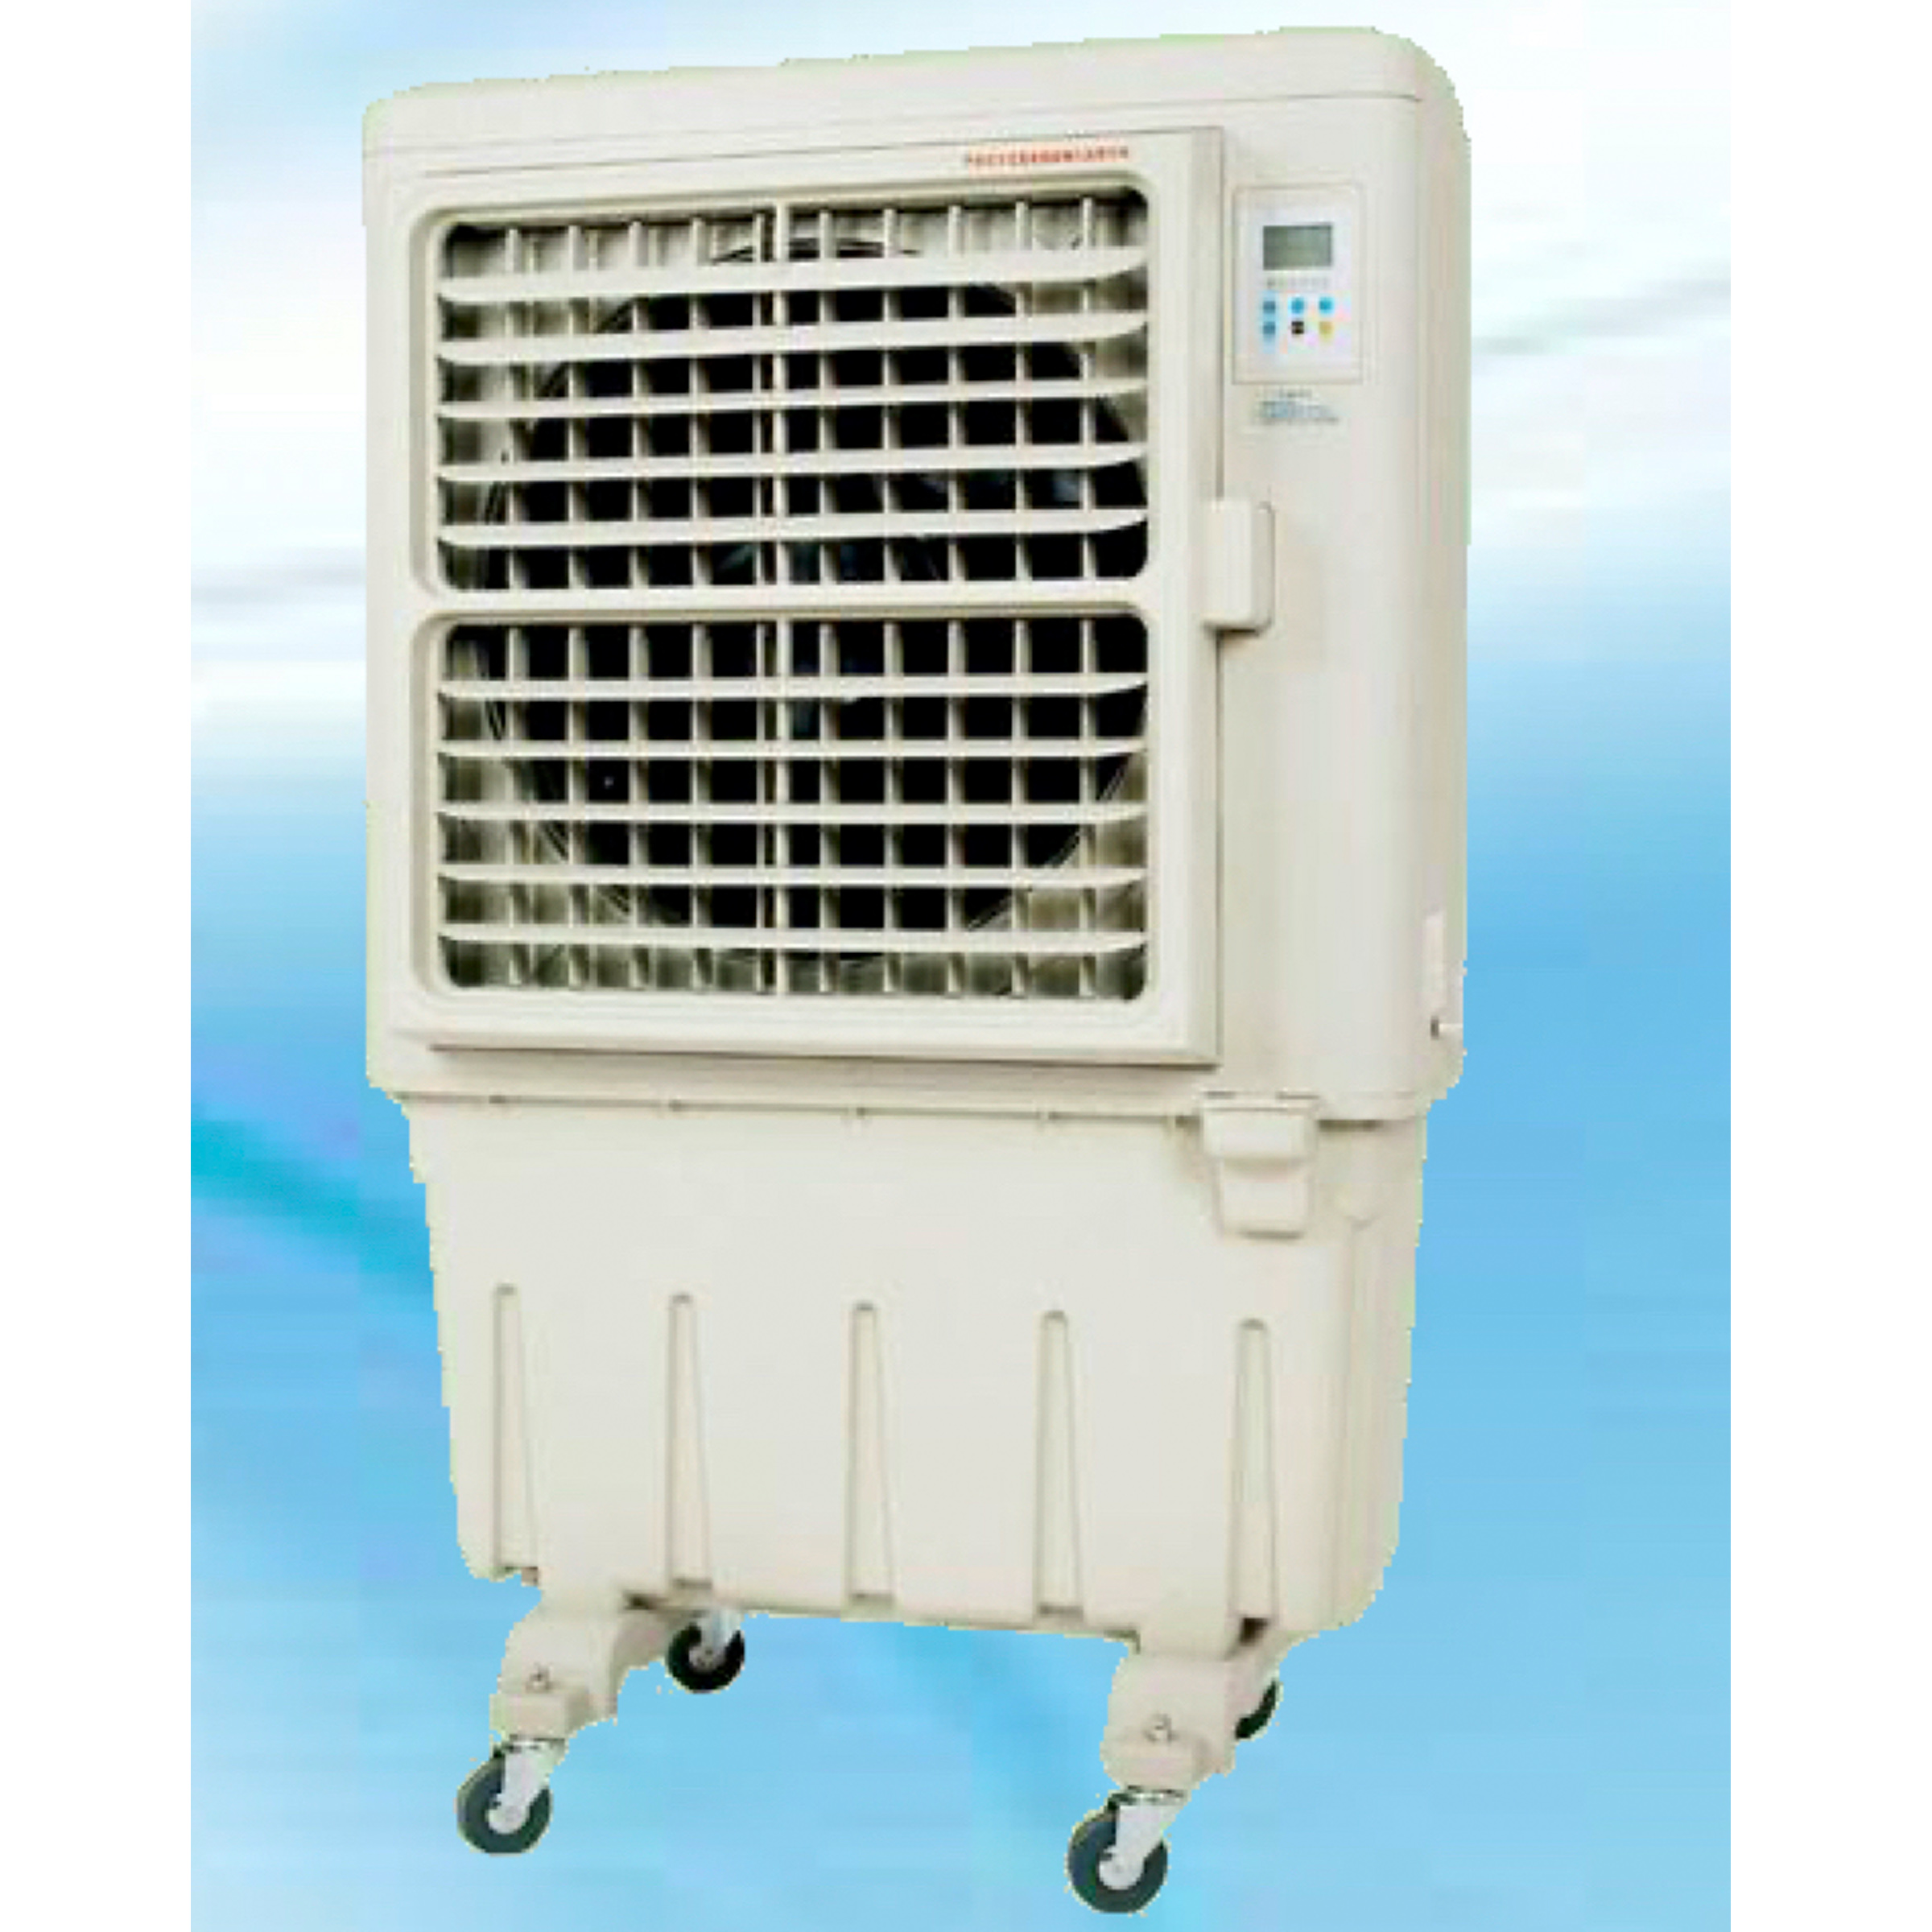 What Is An Evaporative Air Cooler